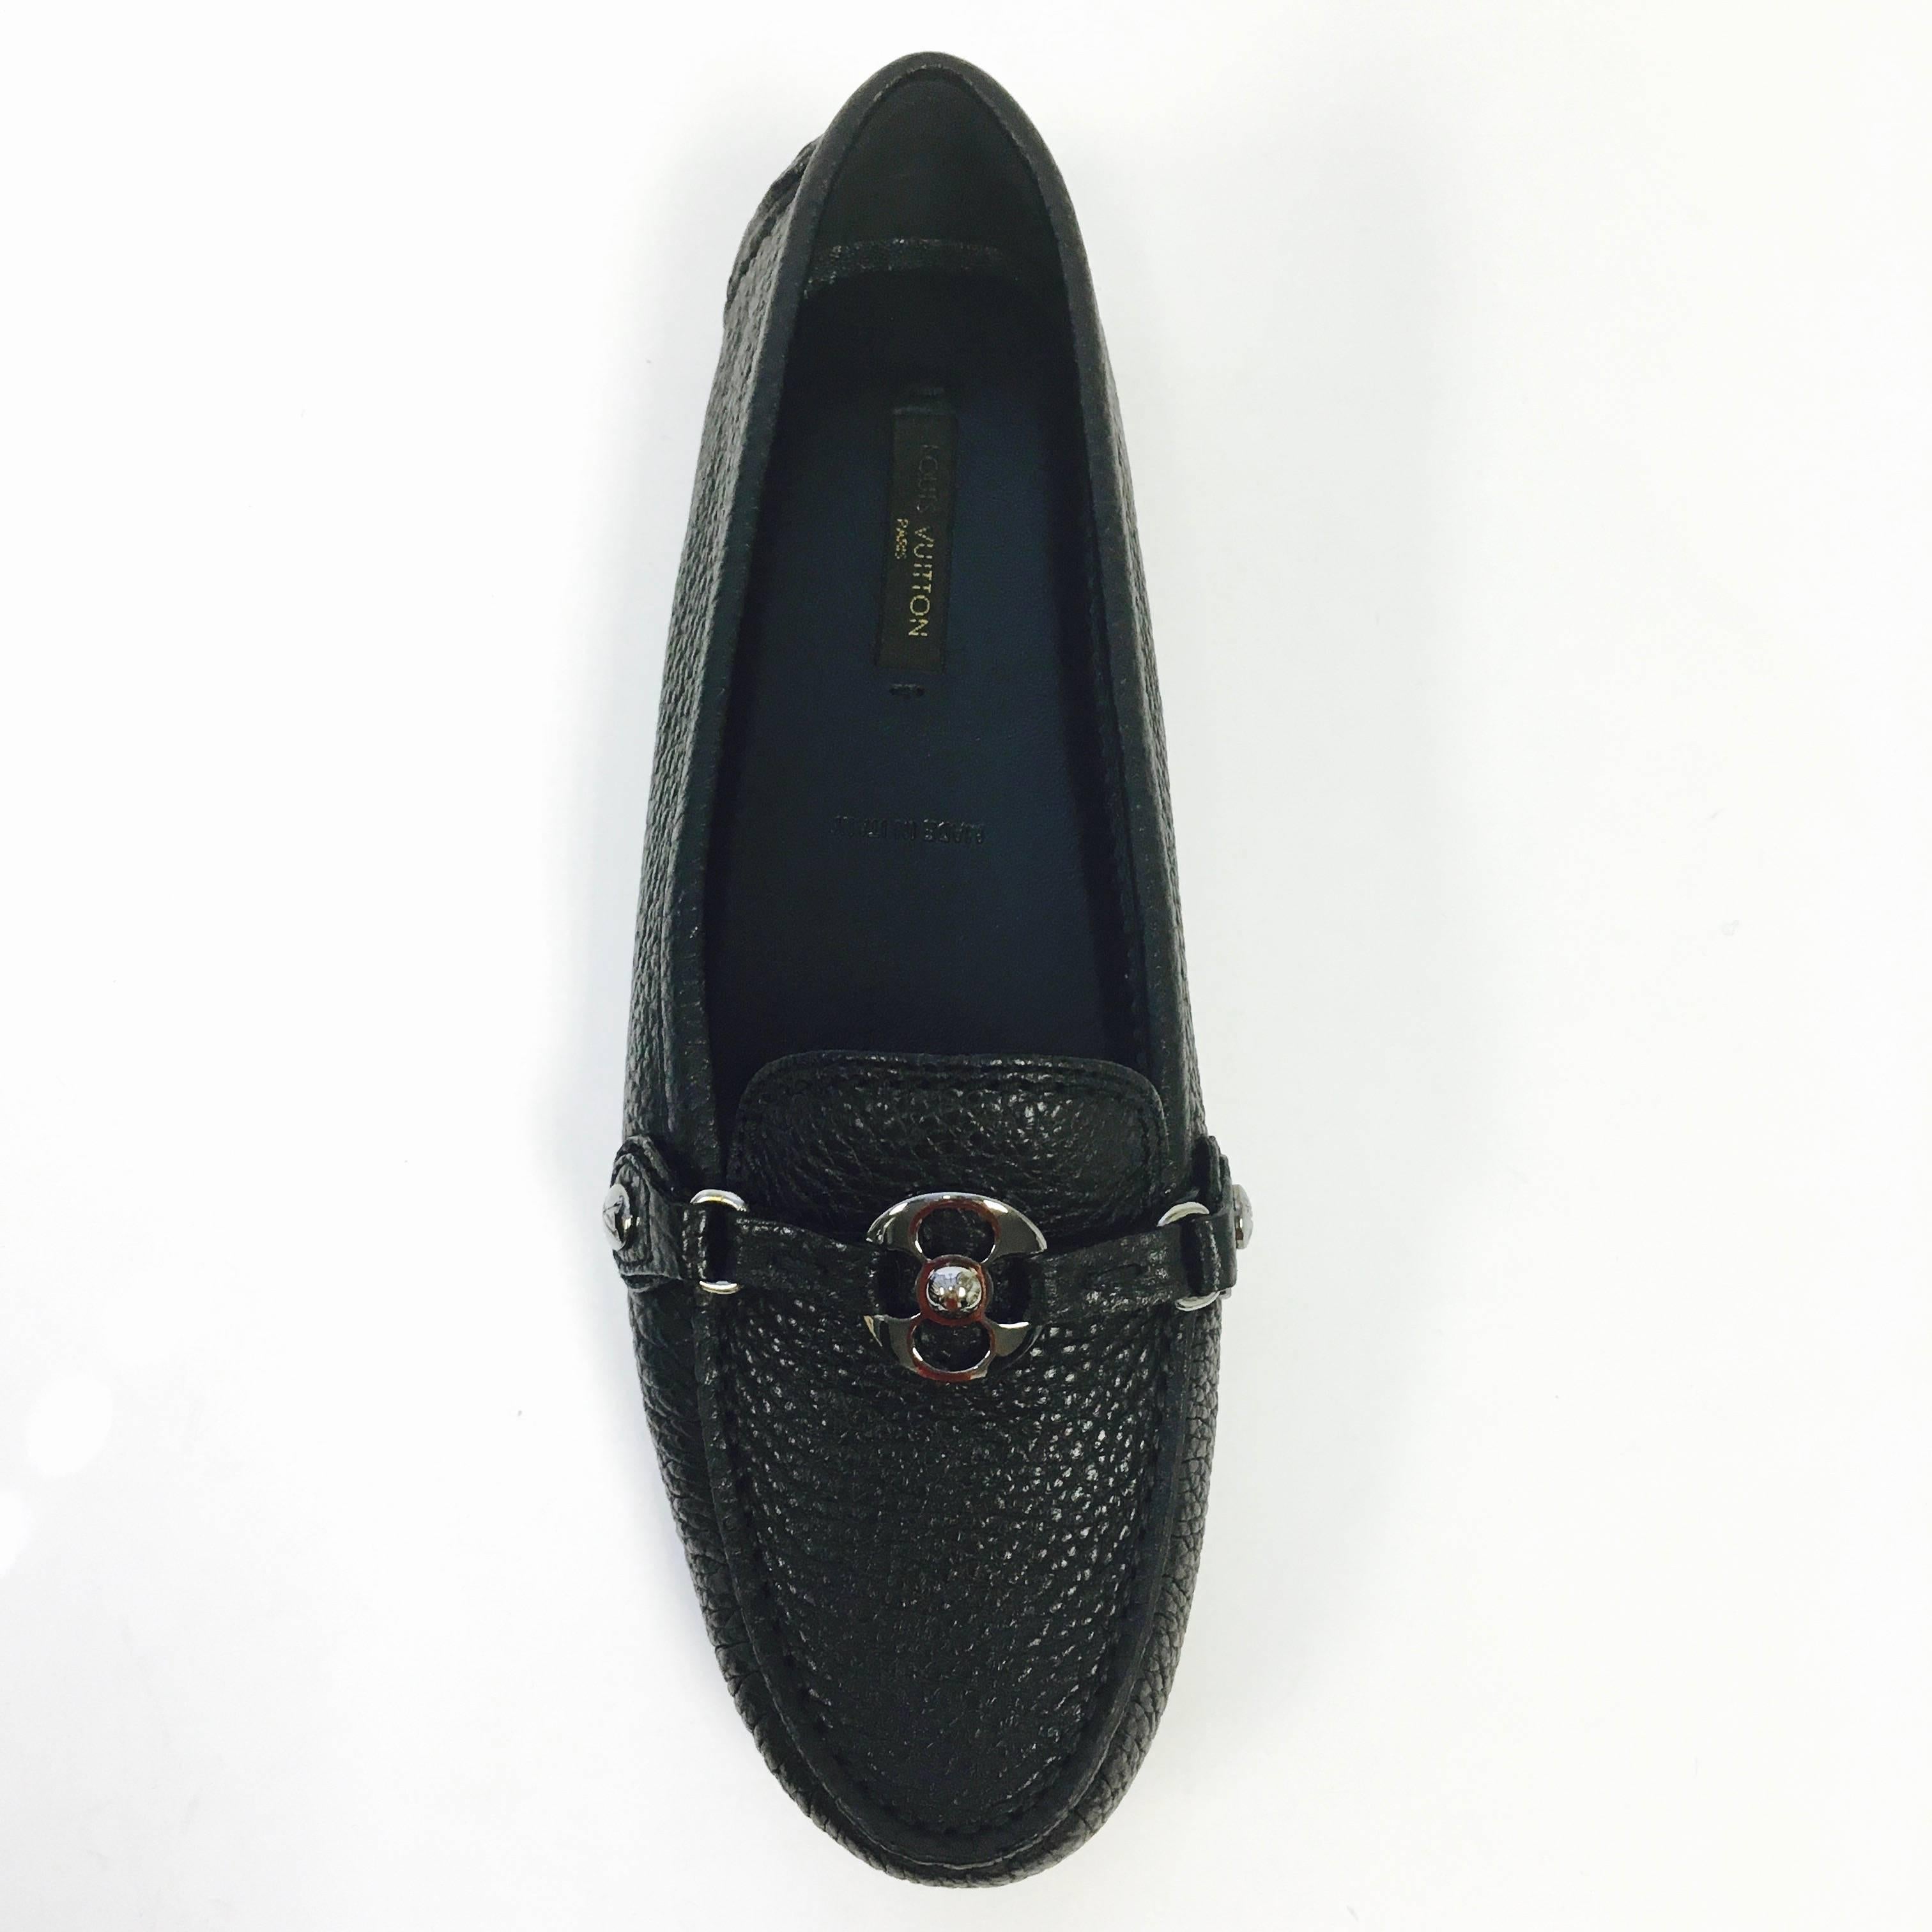 Elegant and simple, these stylish loafers are versatile and comfortable in grained calf leather with bright golden LV rivets and a large Monogram flower accessory. These mocassins have a rubber-dotted sole and padded leather insole for enhanced